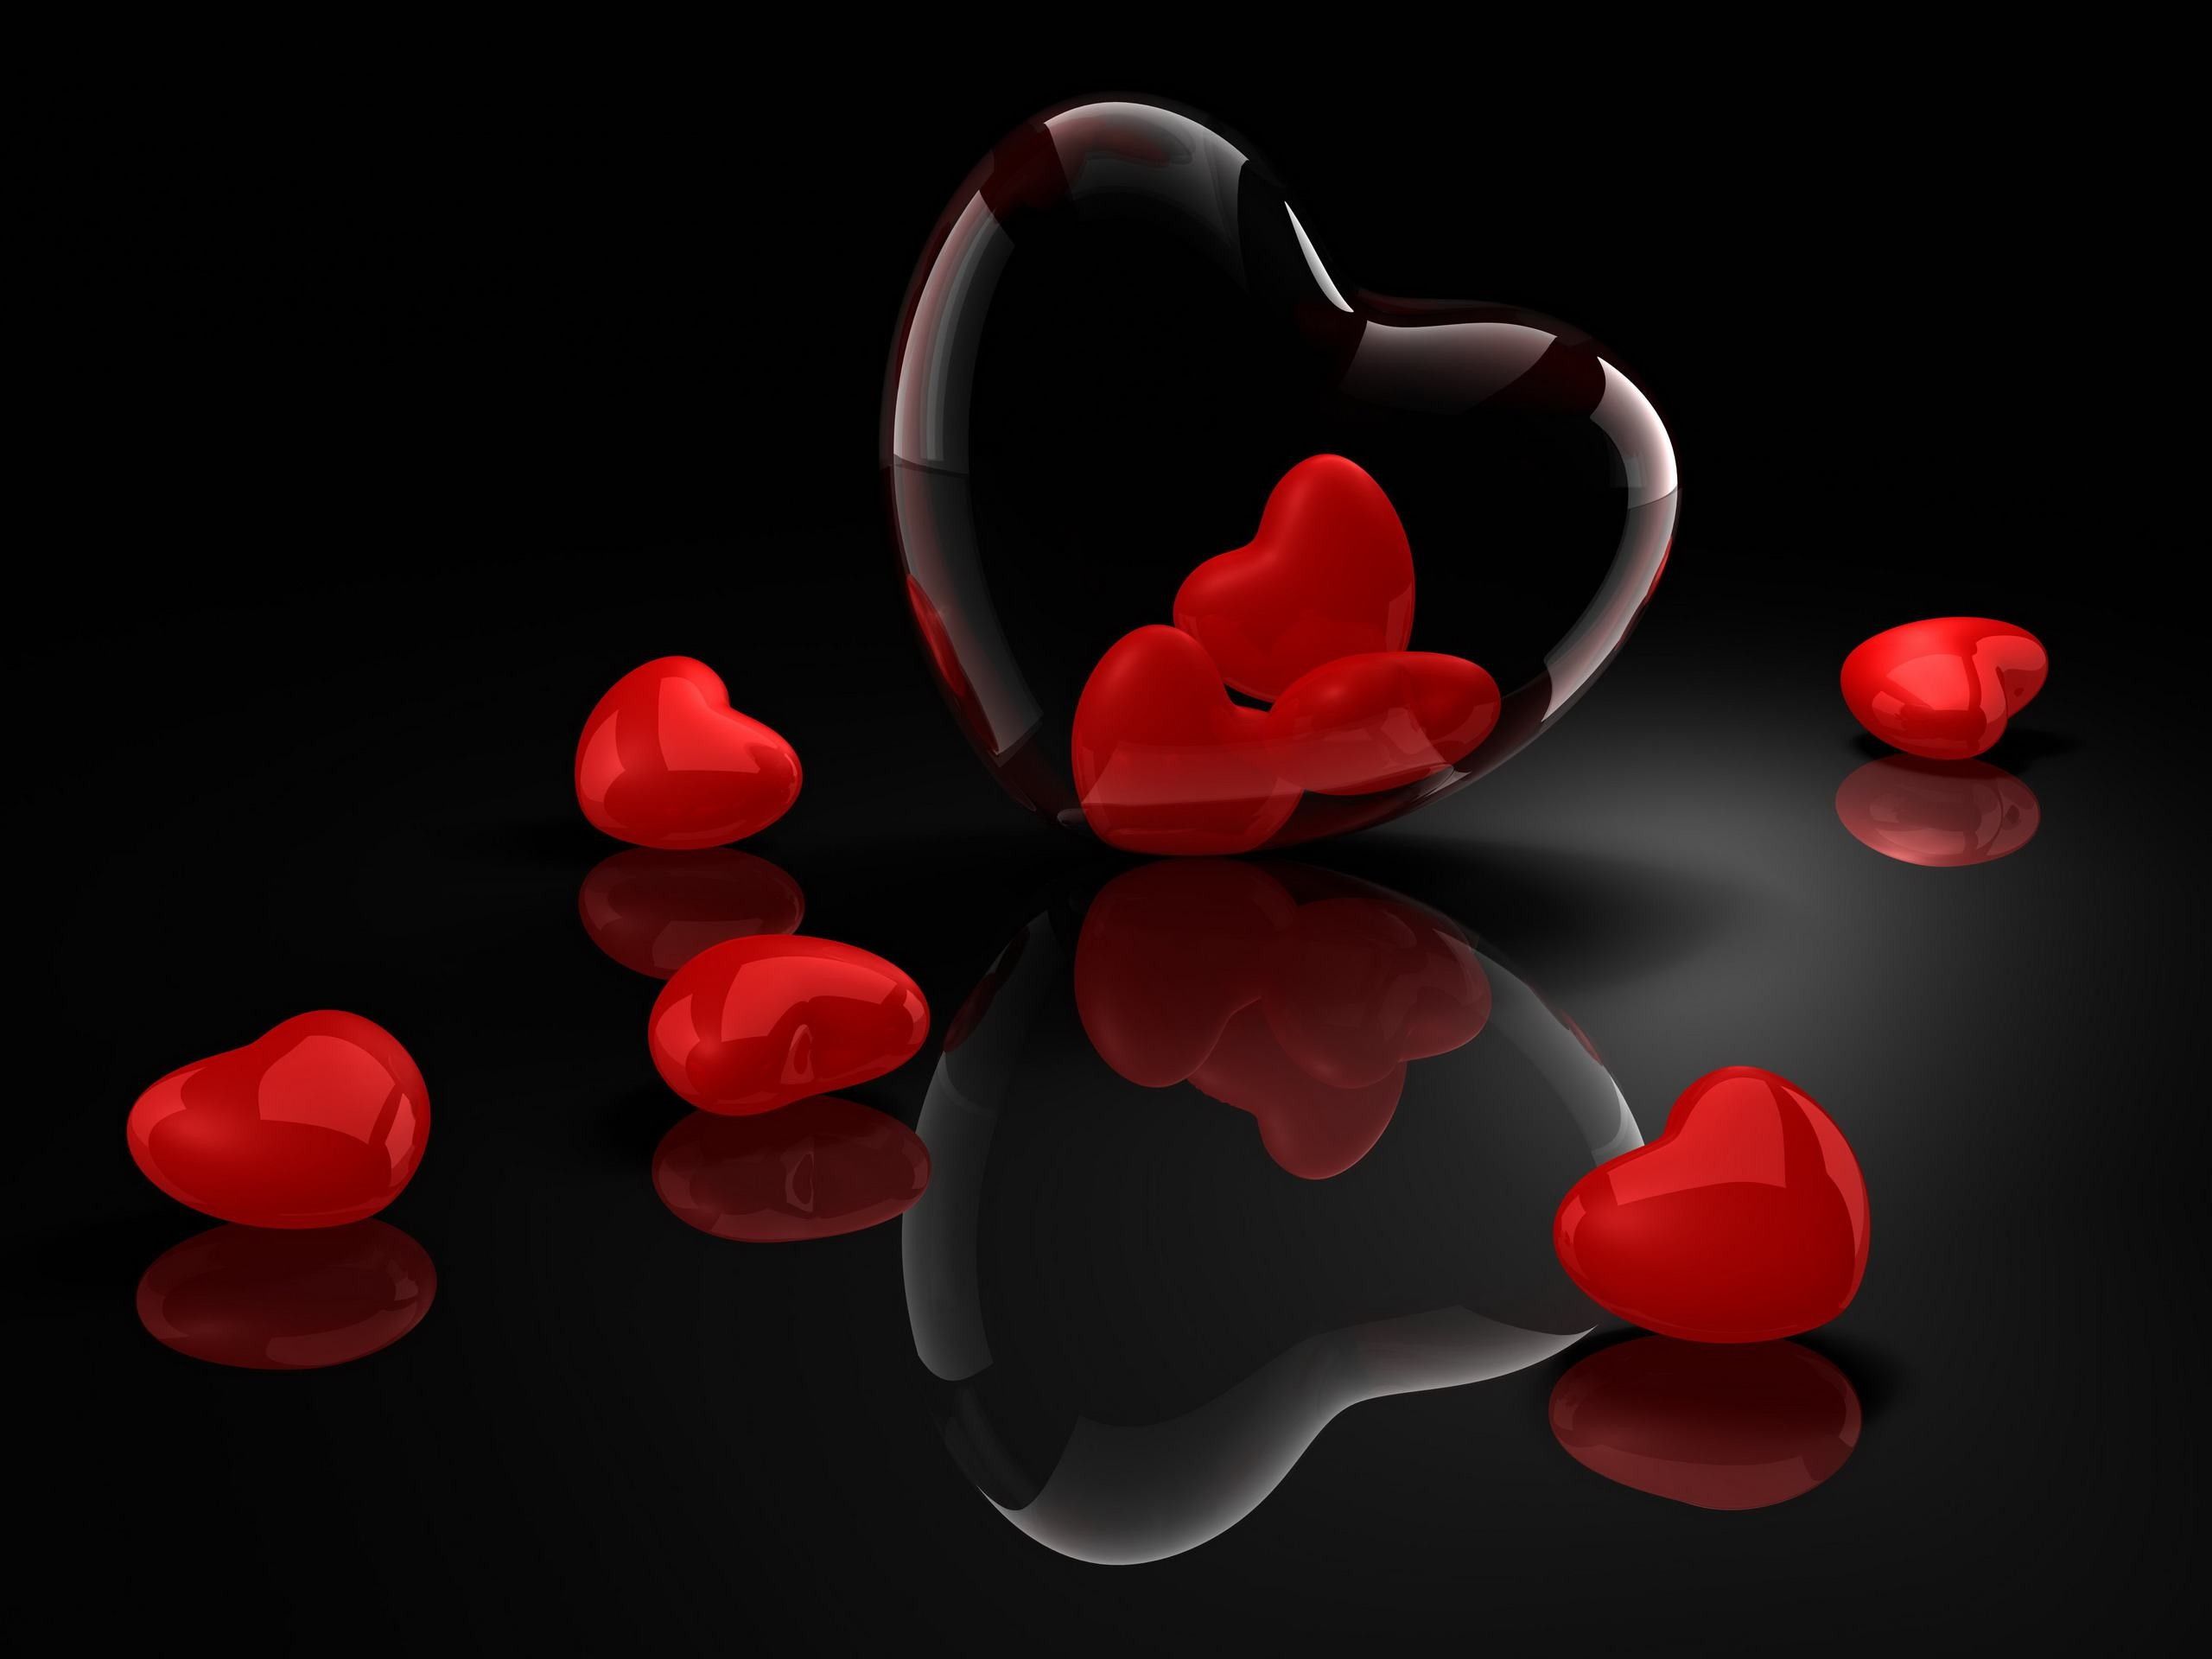 Black and Red Heart Wallpaper Free Black and Red Heart Background